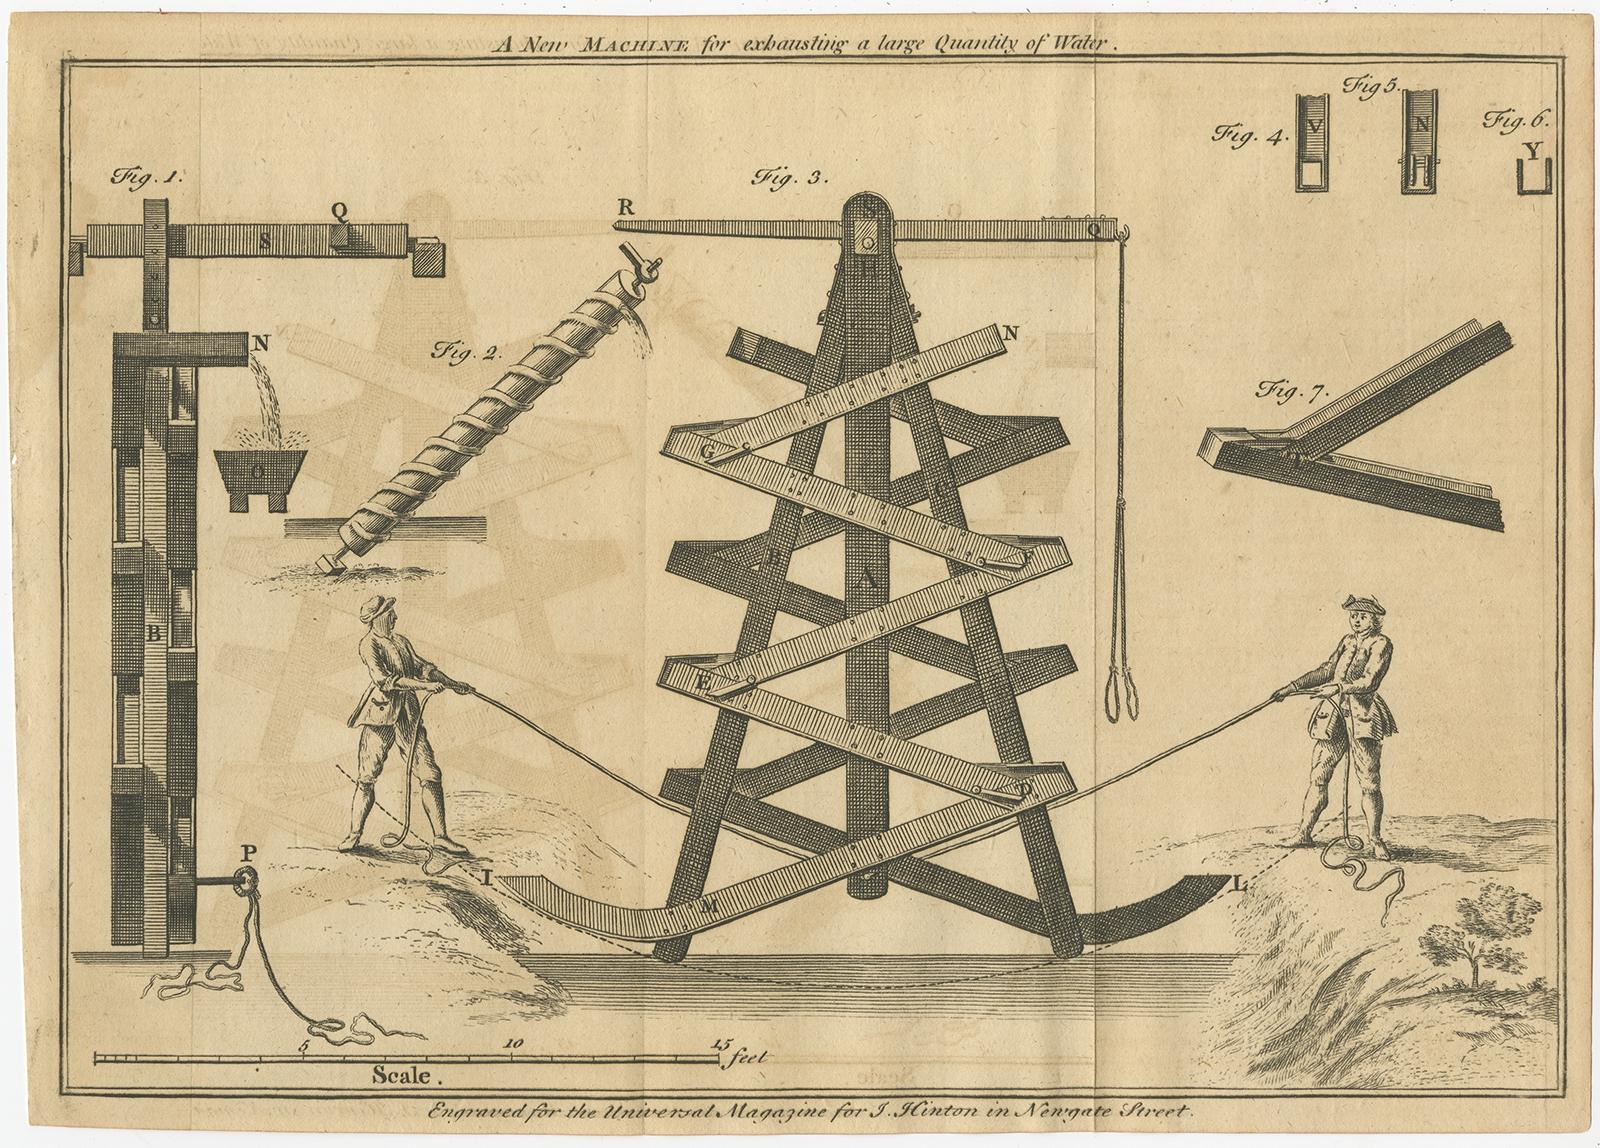 Antique print titled 'A New Machine for exhausting a large quantity of water'. Print of a new water exhausting machine. This print originates from 'The Universal Magazine of Knowledge and Pleasure'. 

Artists and Engravers: The Universal Magazine